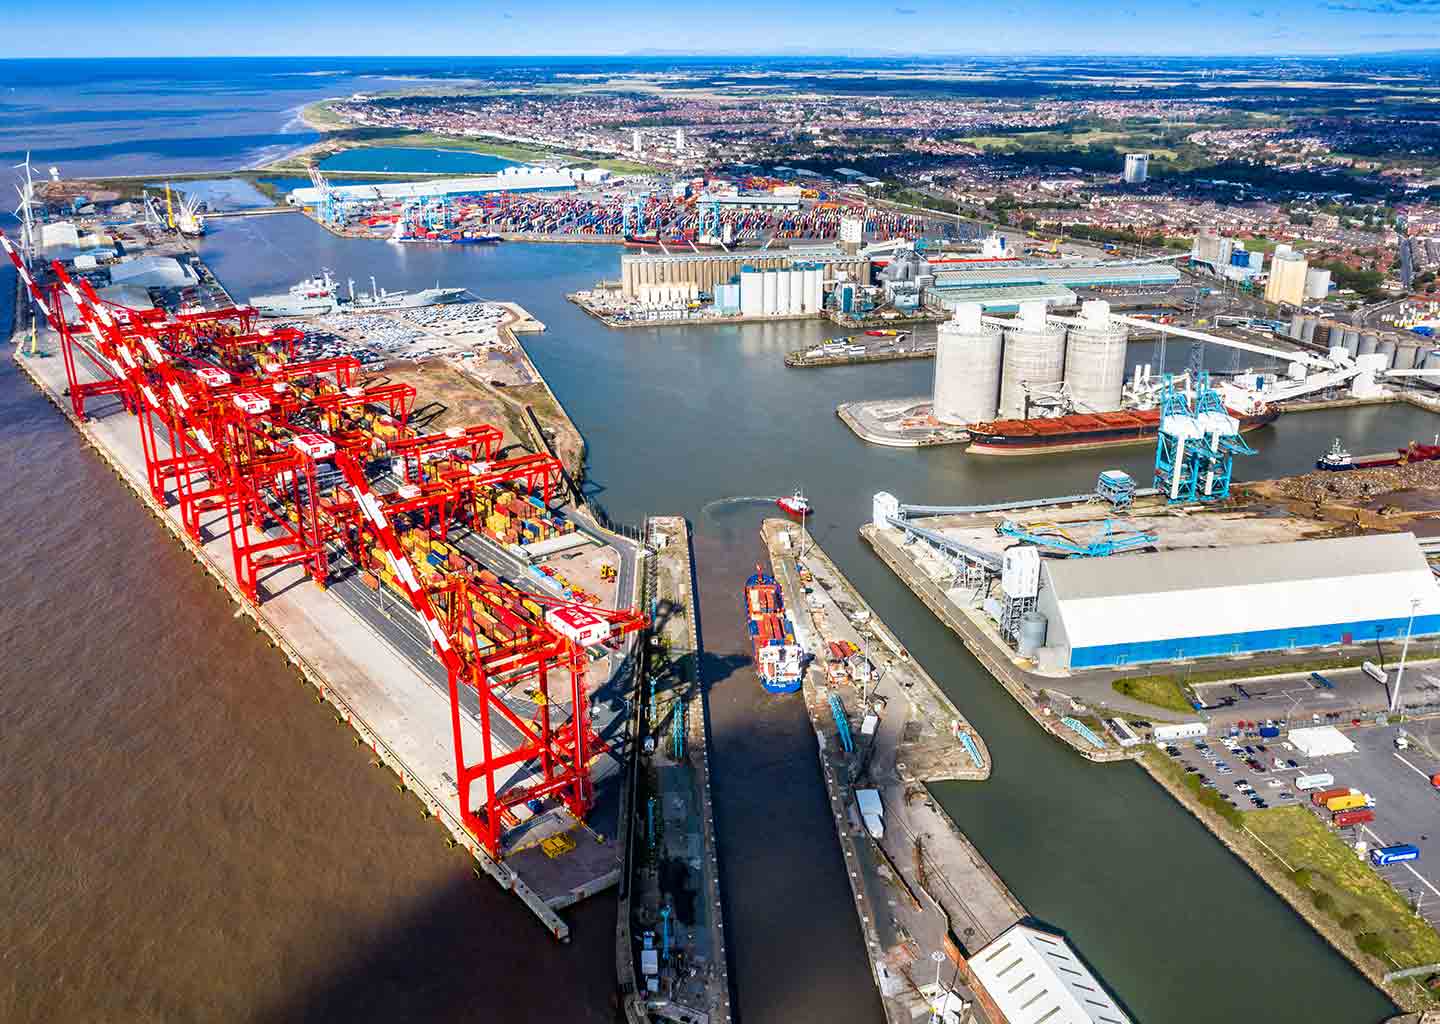 Image of the Port of Liverpool